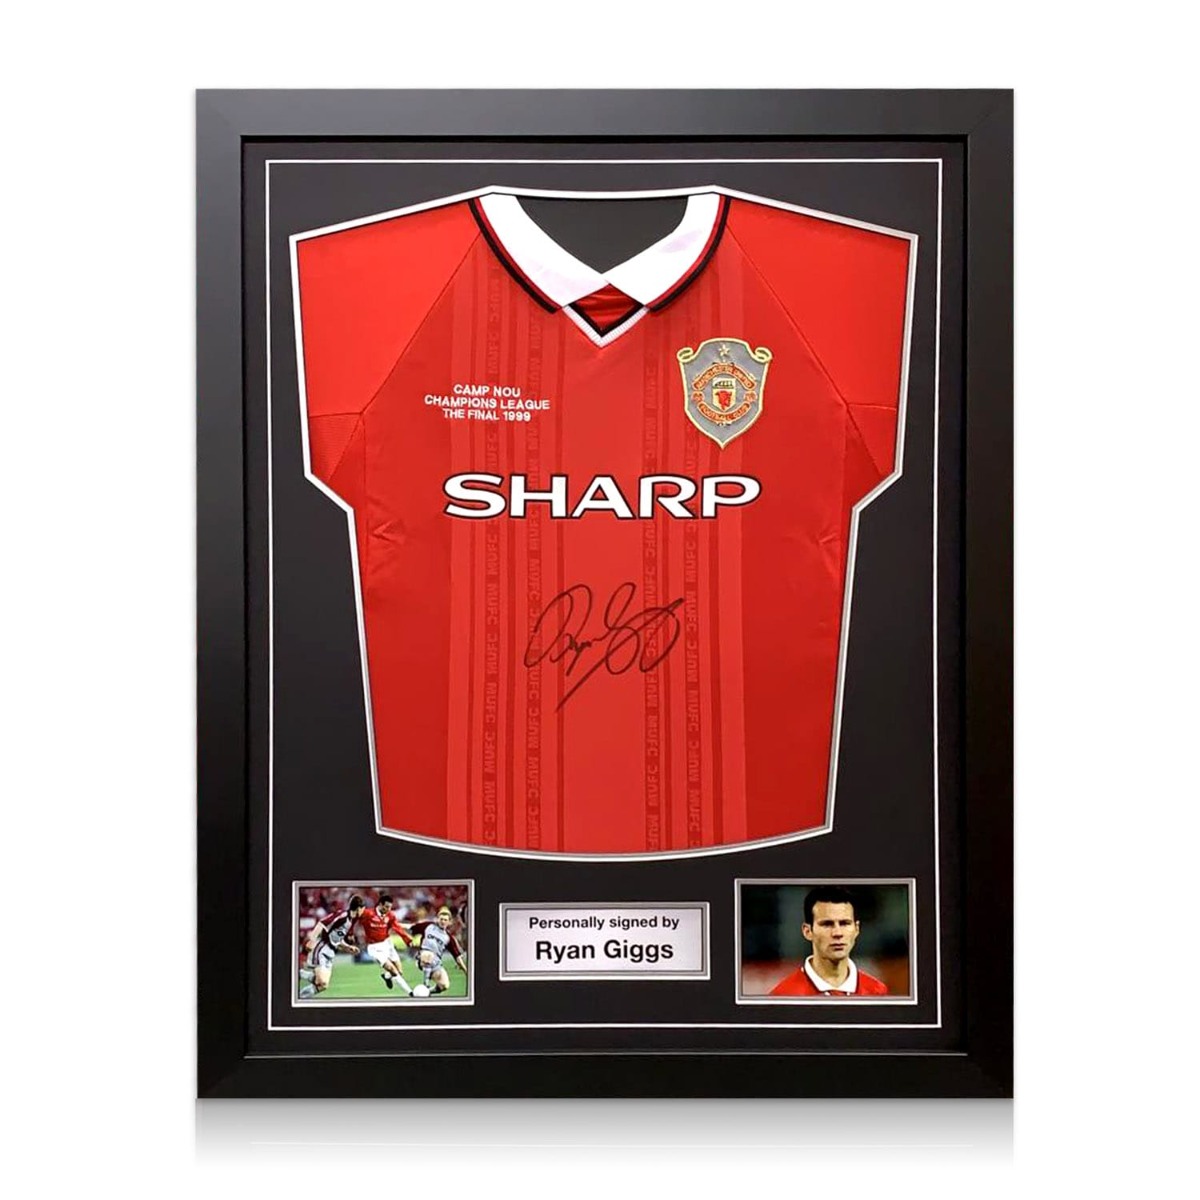 Exclusive Memorabilia Ryan Giggs Signed 1999 Manchester United Champions League Shirt In Gift Box